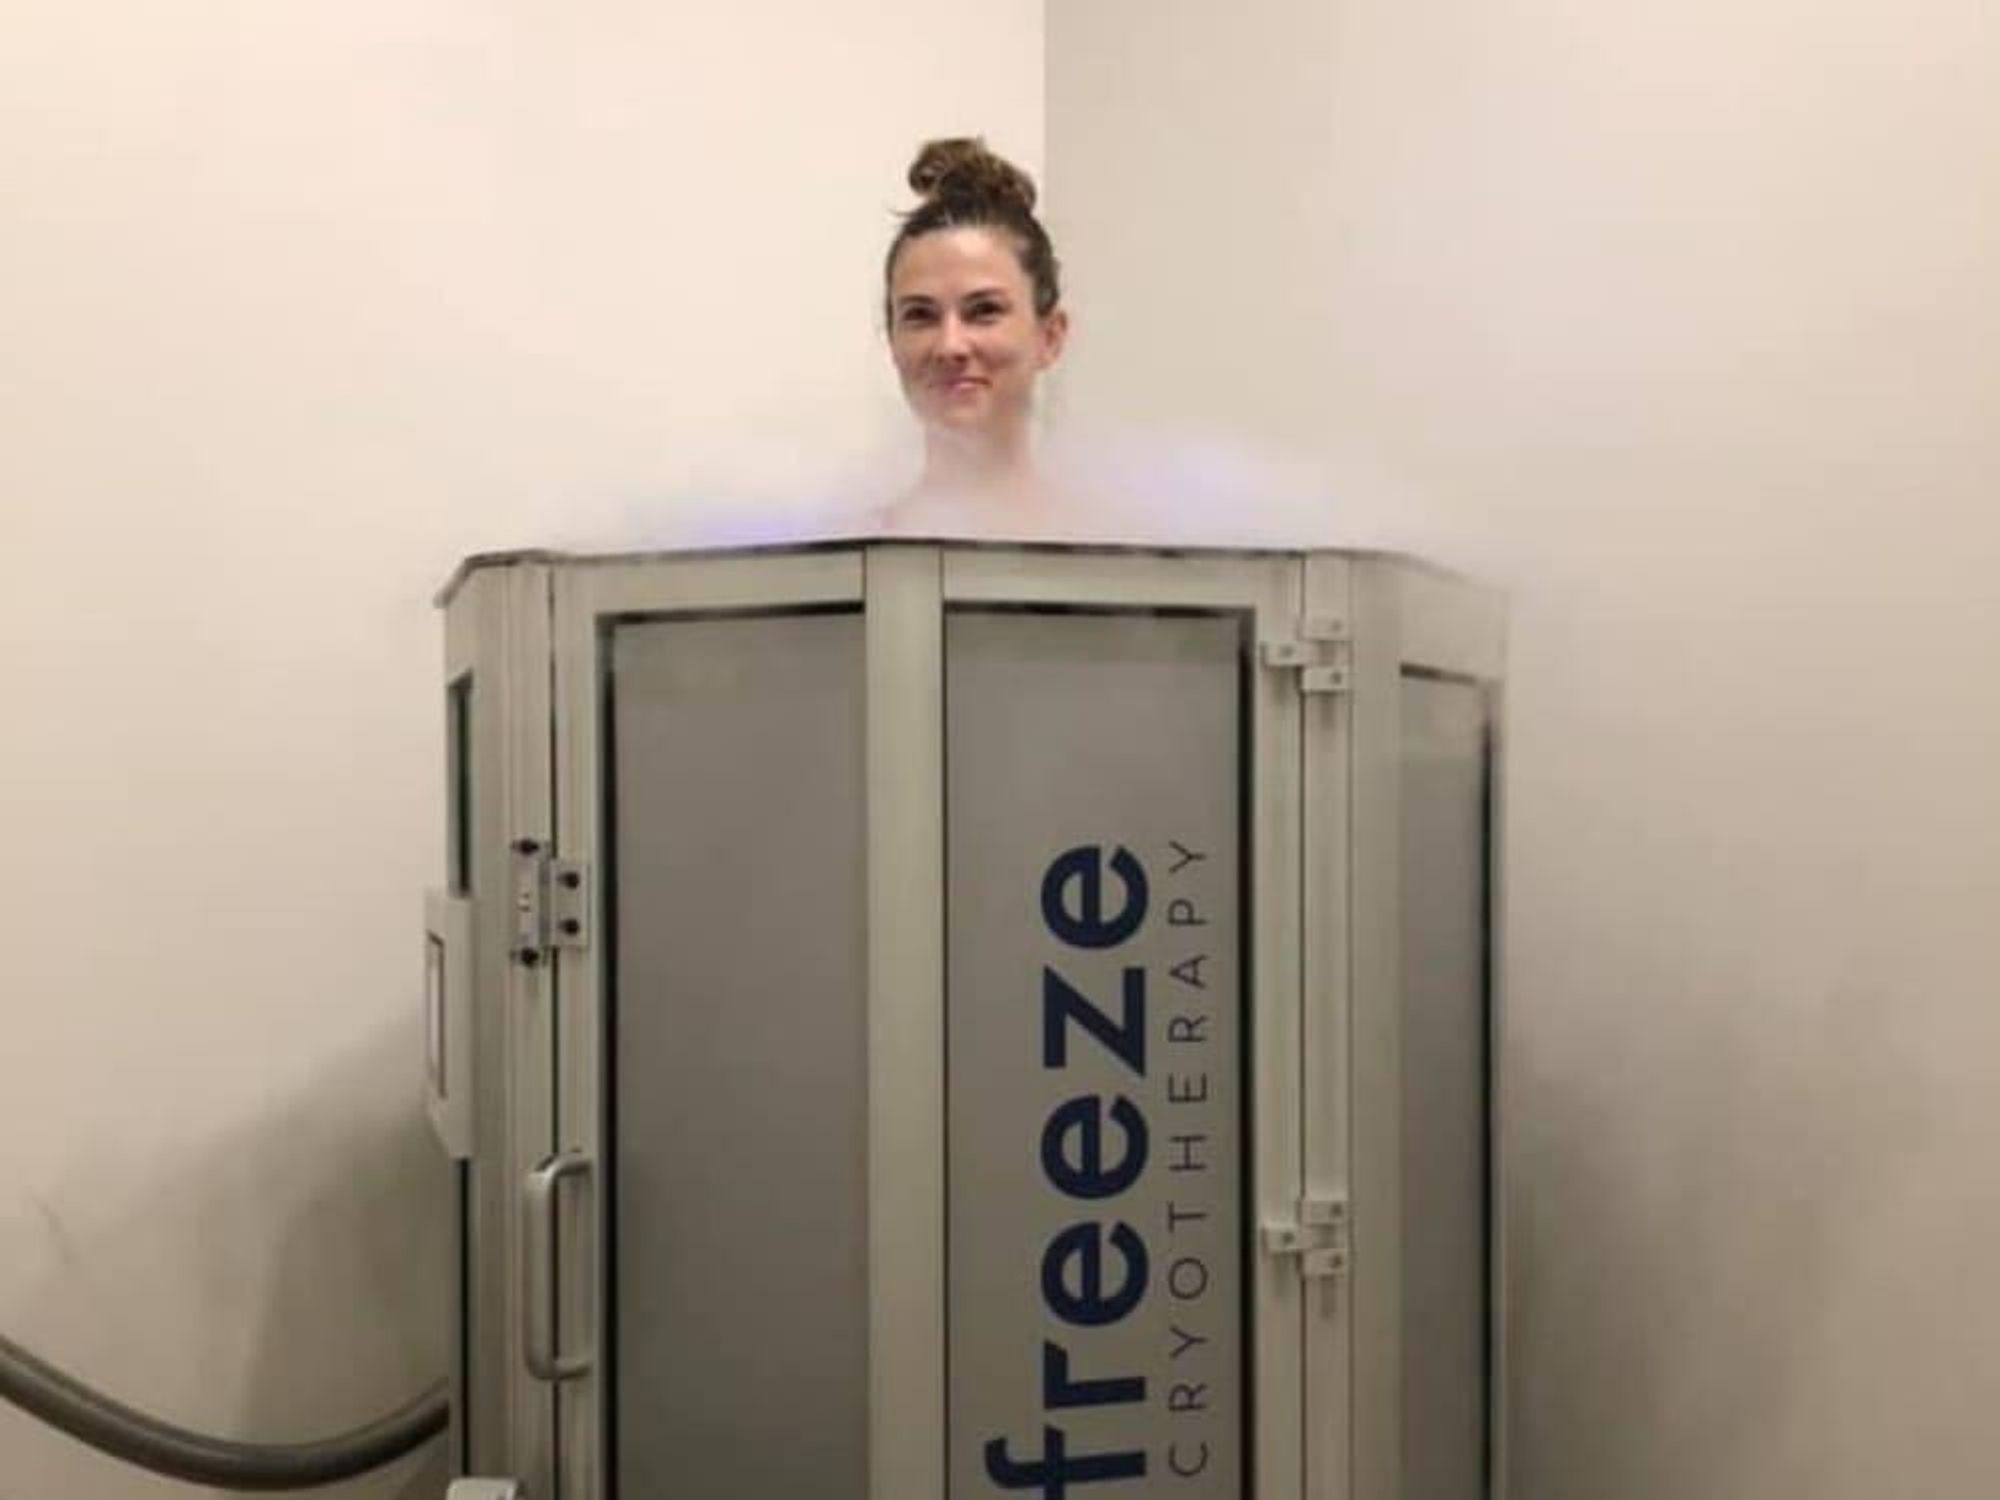 Freeze Cryotherapy